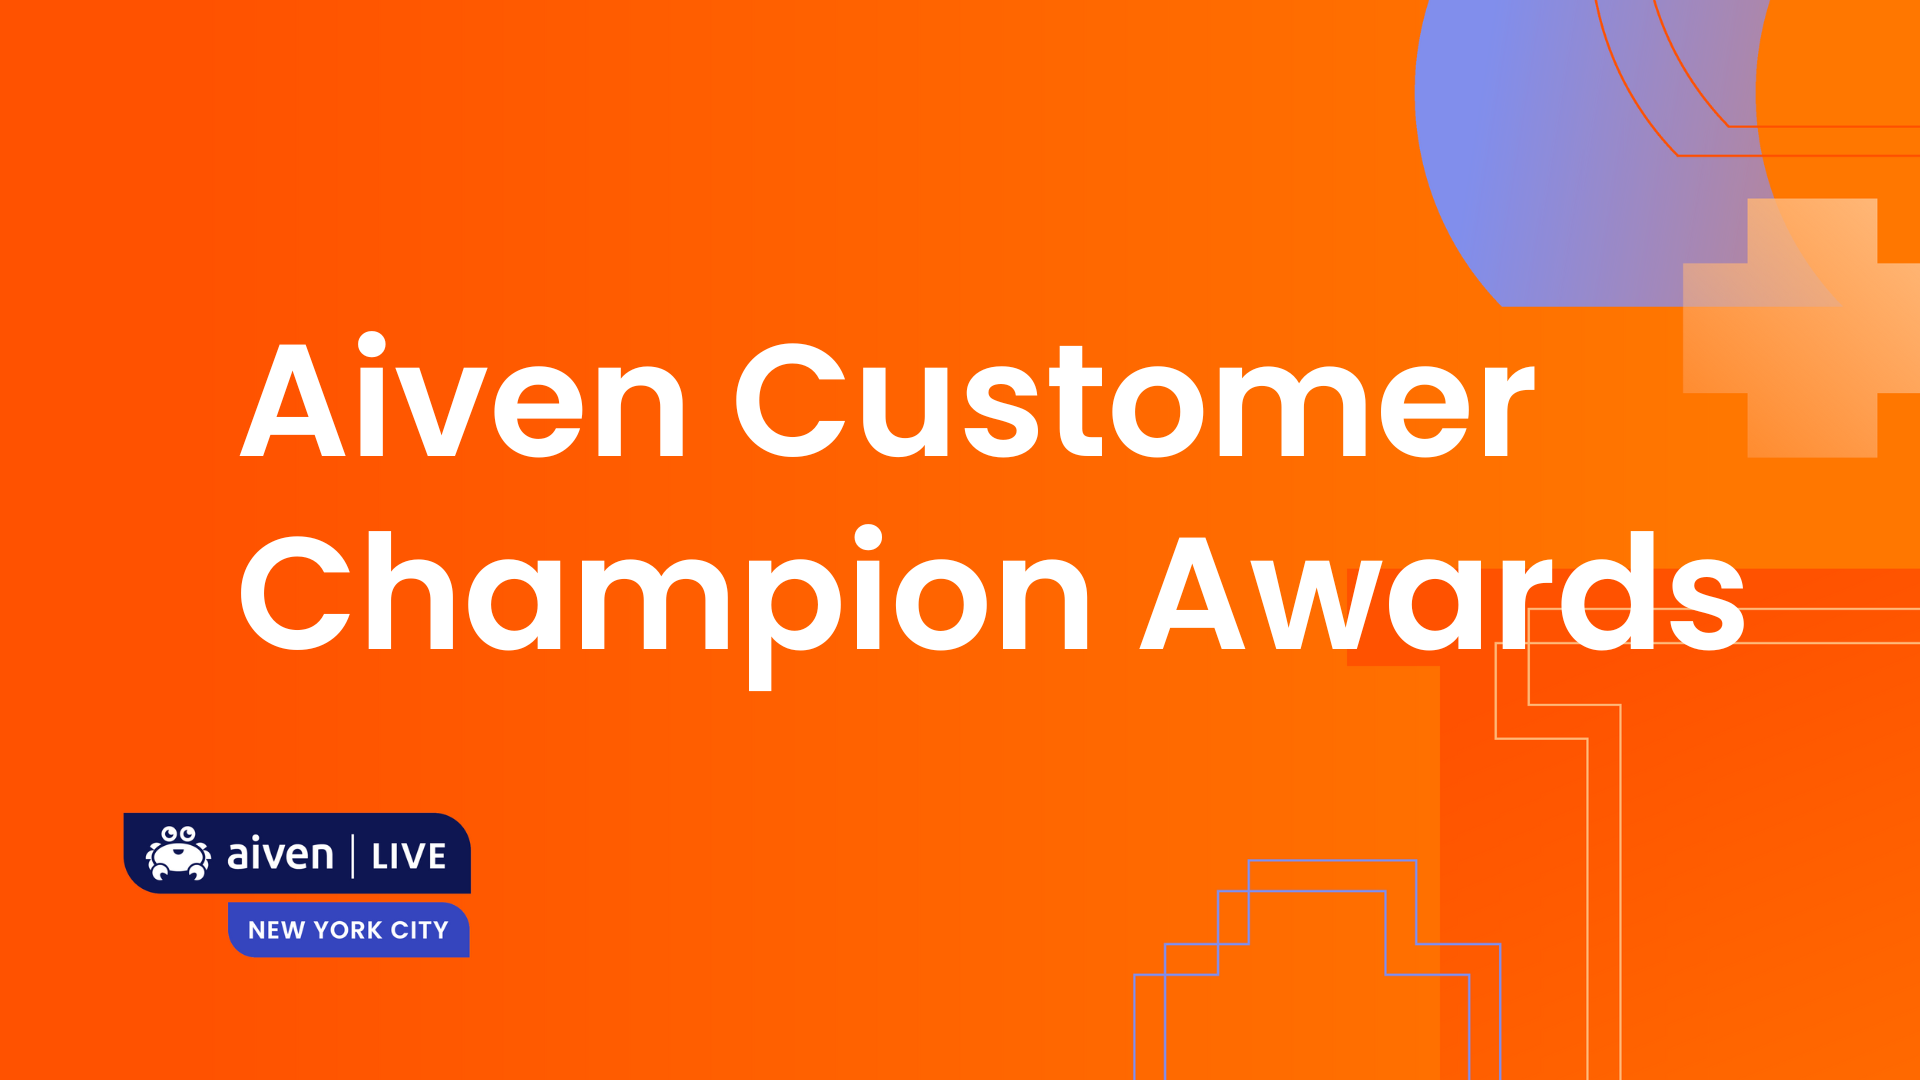 Aiven’s Customer ‘Champions’ GLOBO, Avaya, Priceline and Sway AI Awarded for Innovation, Excellence and Impact  illustration